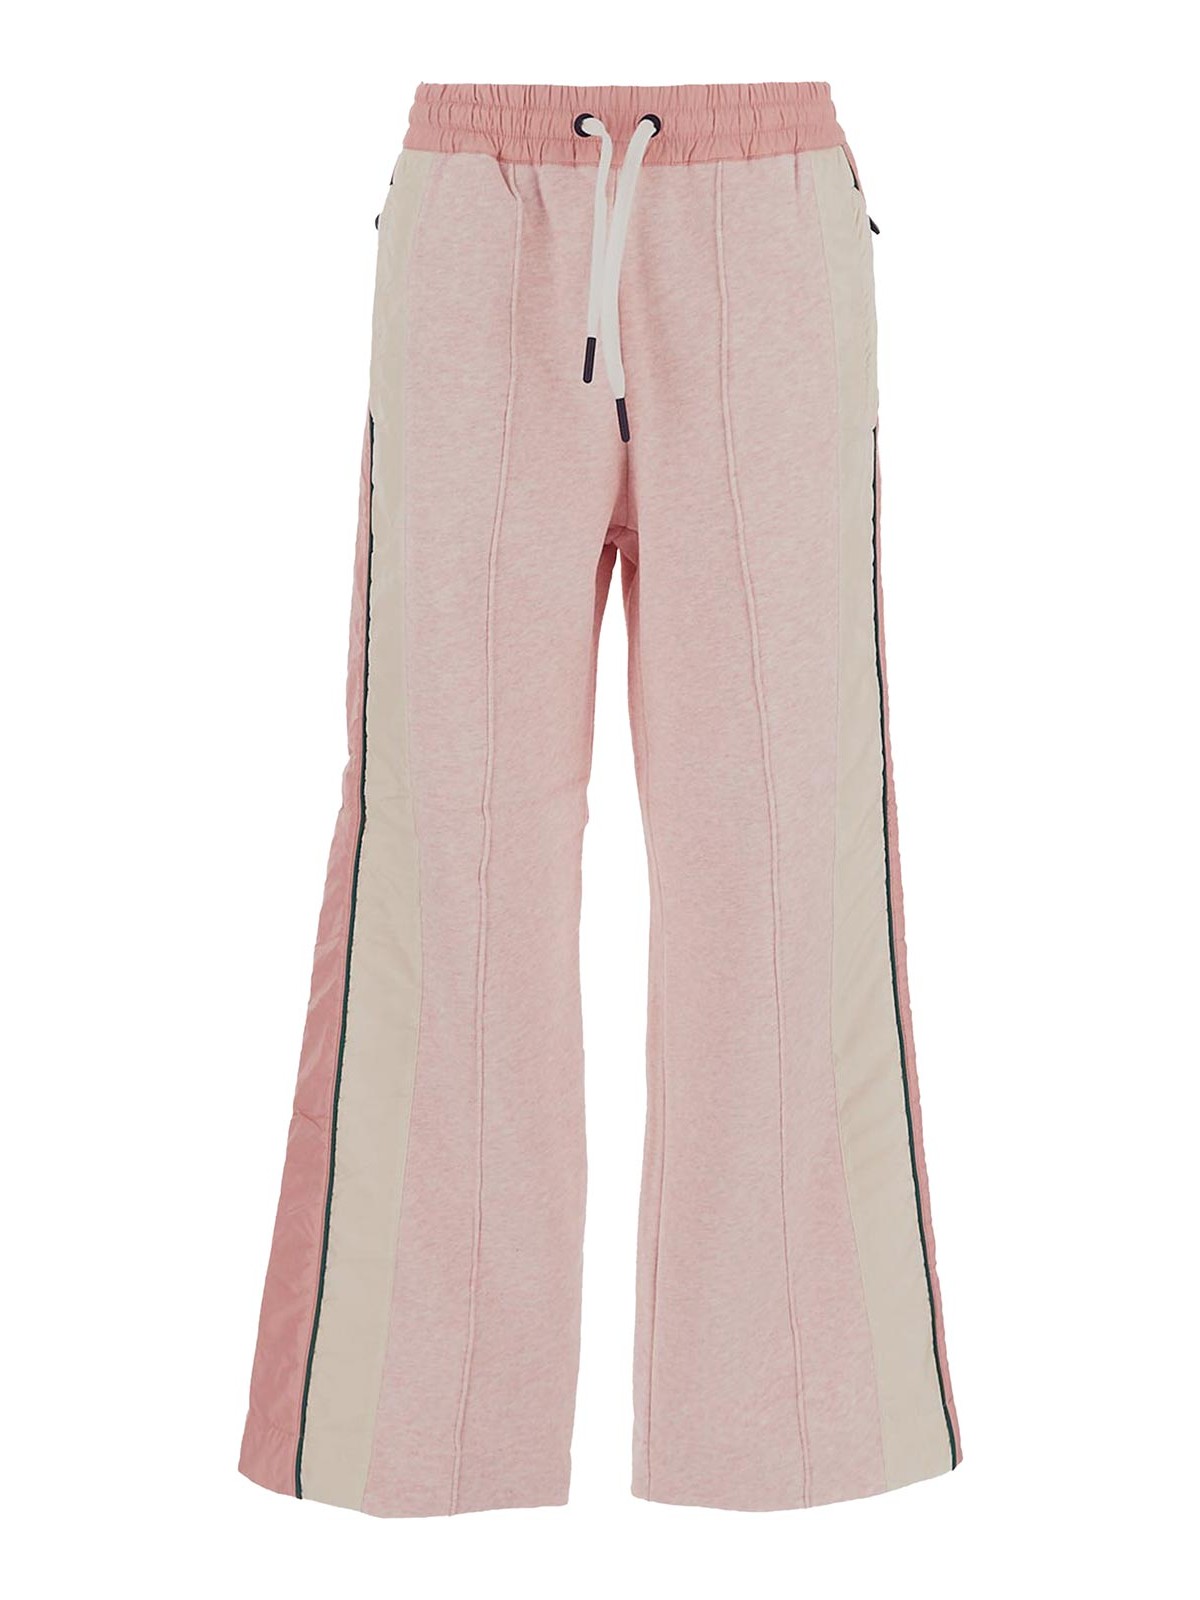 Moncler Grenoble Trousers In Nude & Neutrals